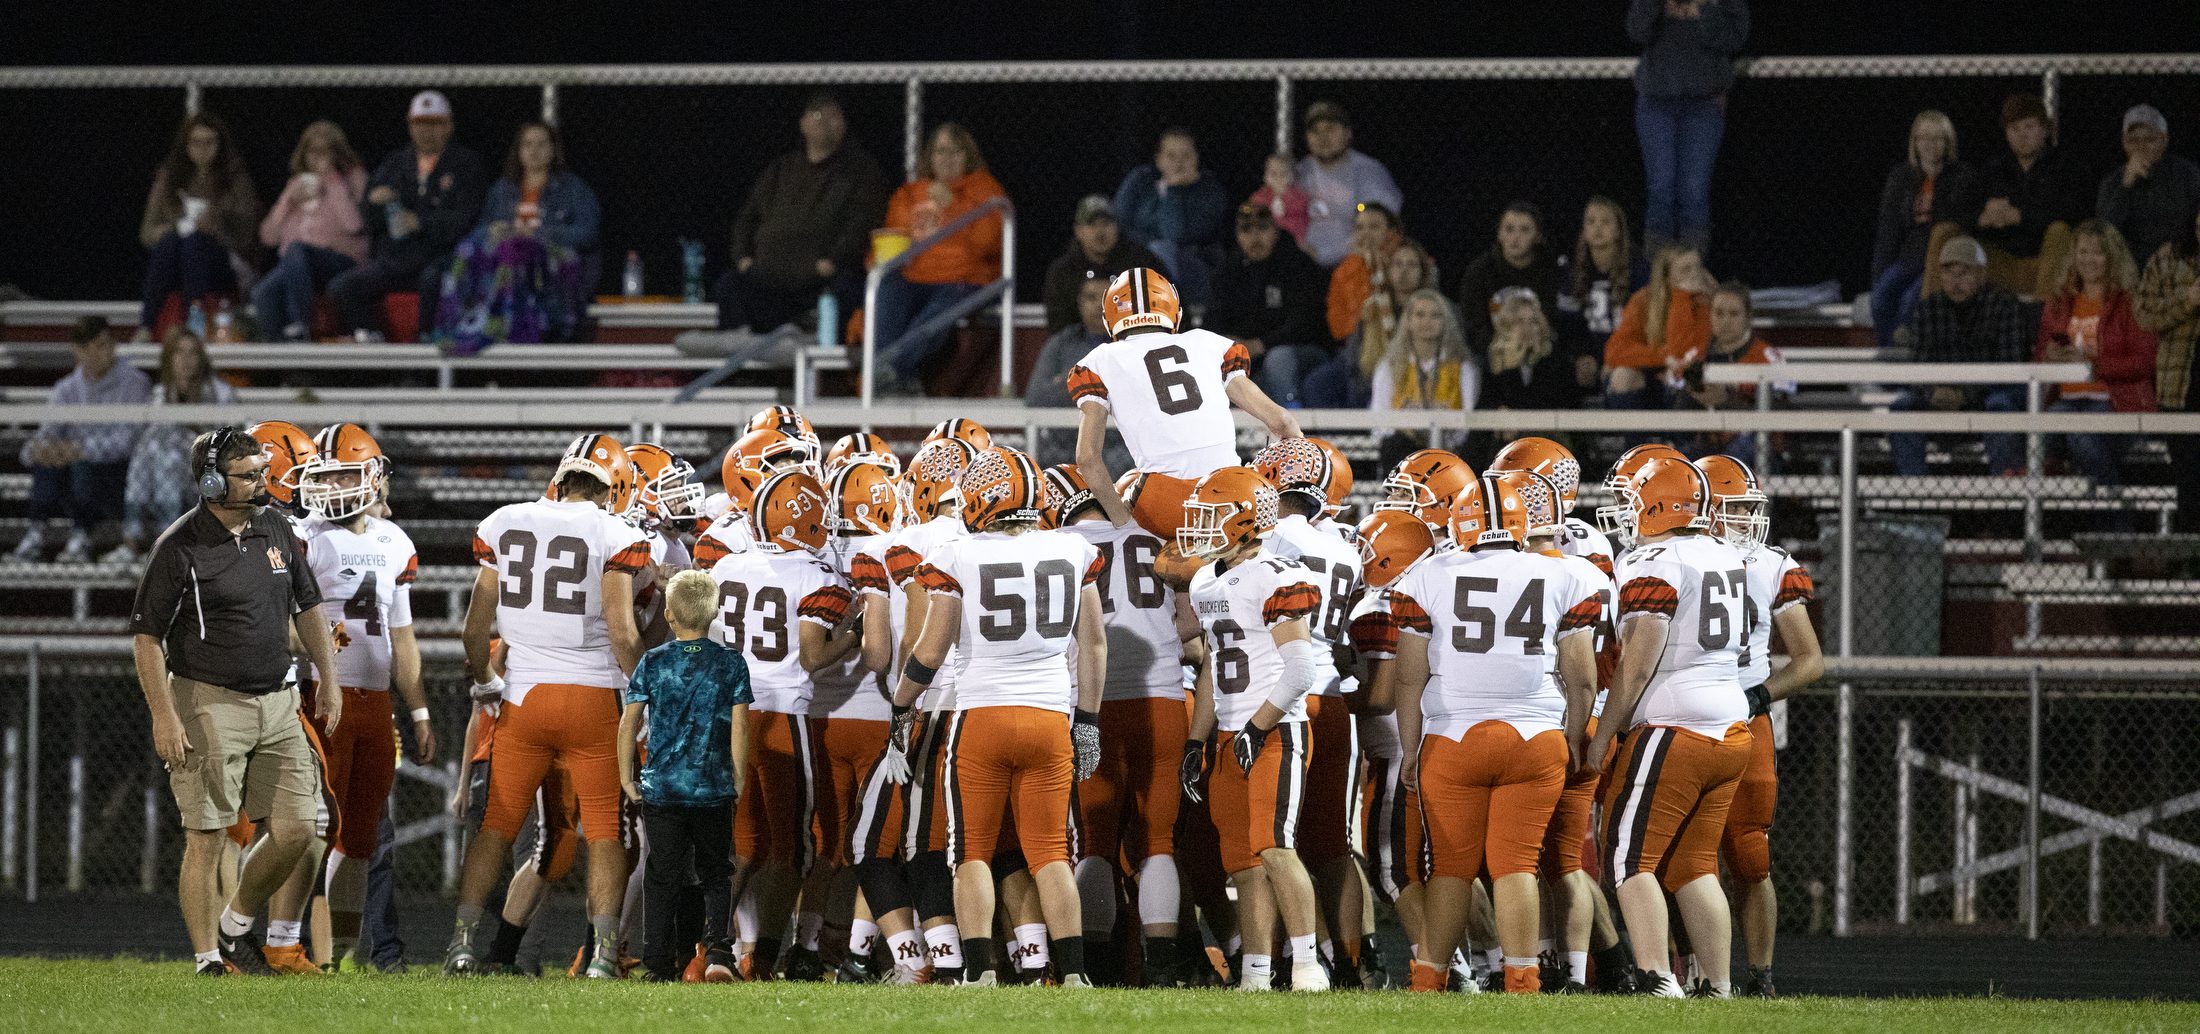 Nelsonville-York High Schools Christopher McDonald (6) is hoisted up by his team a game between Nelsonville-York and Meigs on Oct. 4, 2019 at Meigs High School in Pomeroy, Ohio. PHOTO: Charles Hatcher/WOUB